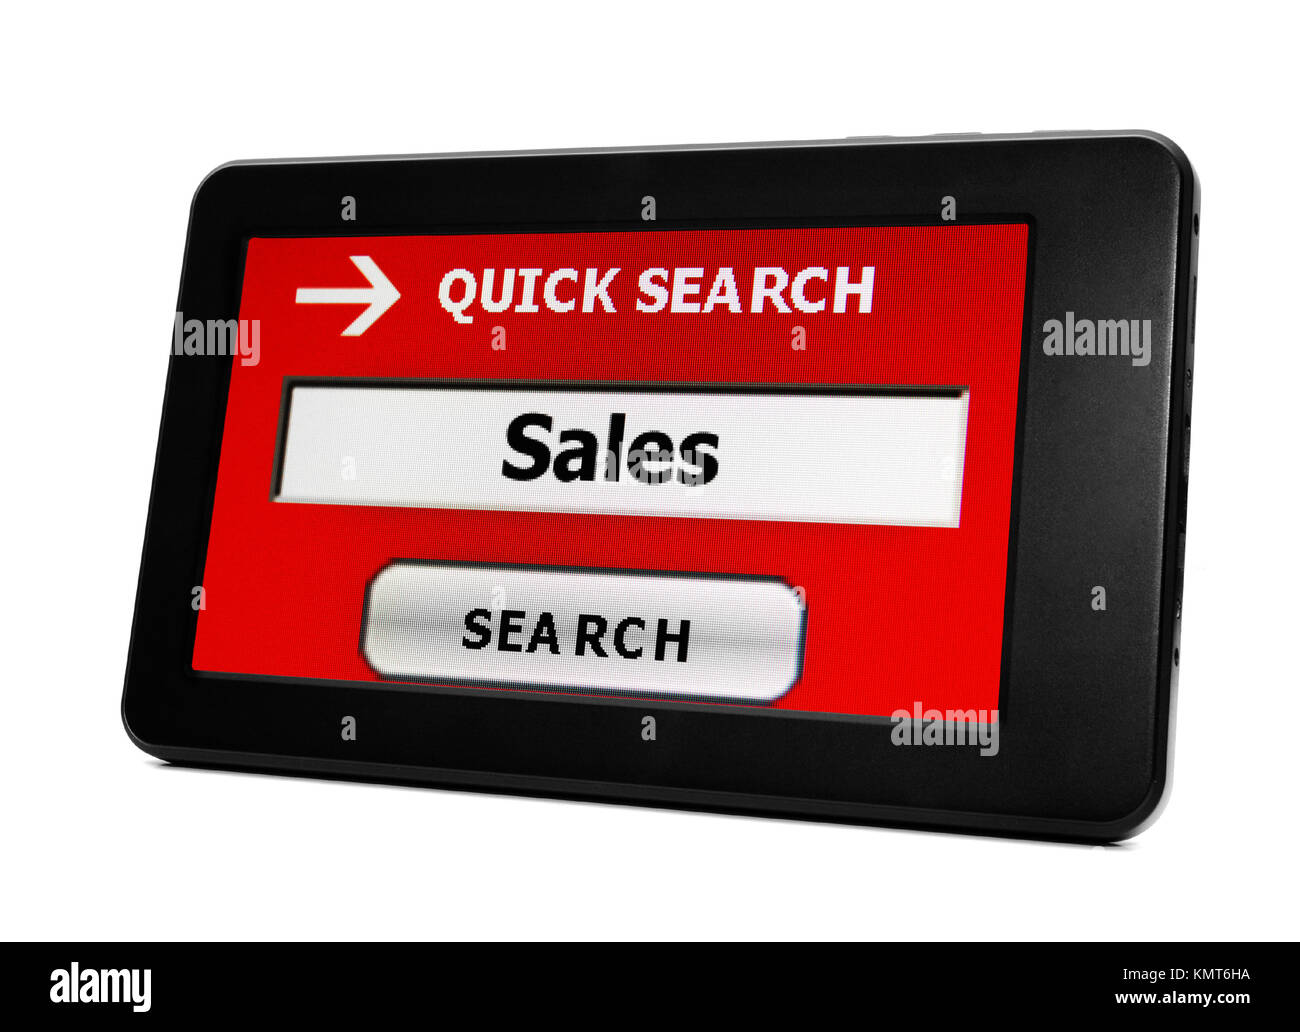 Search for sales Stock Photo